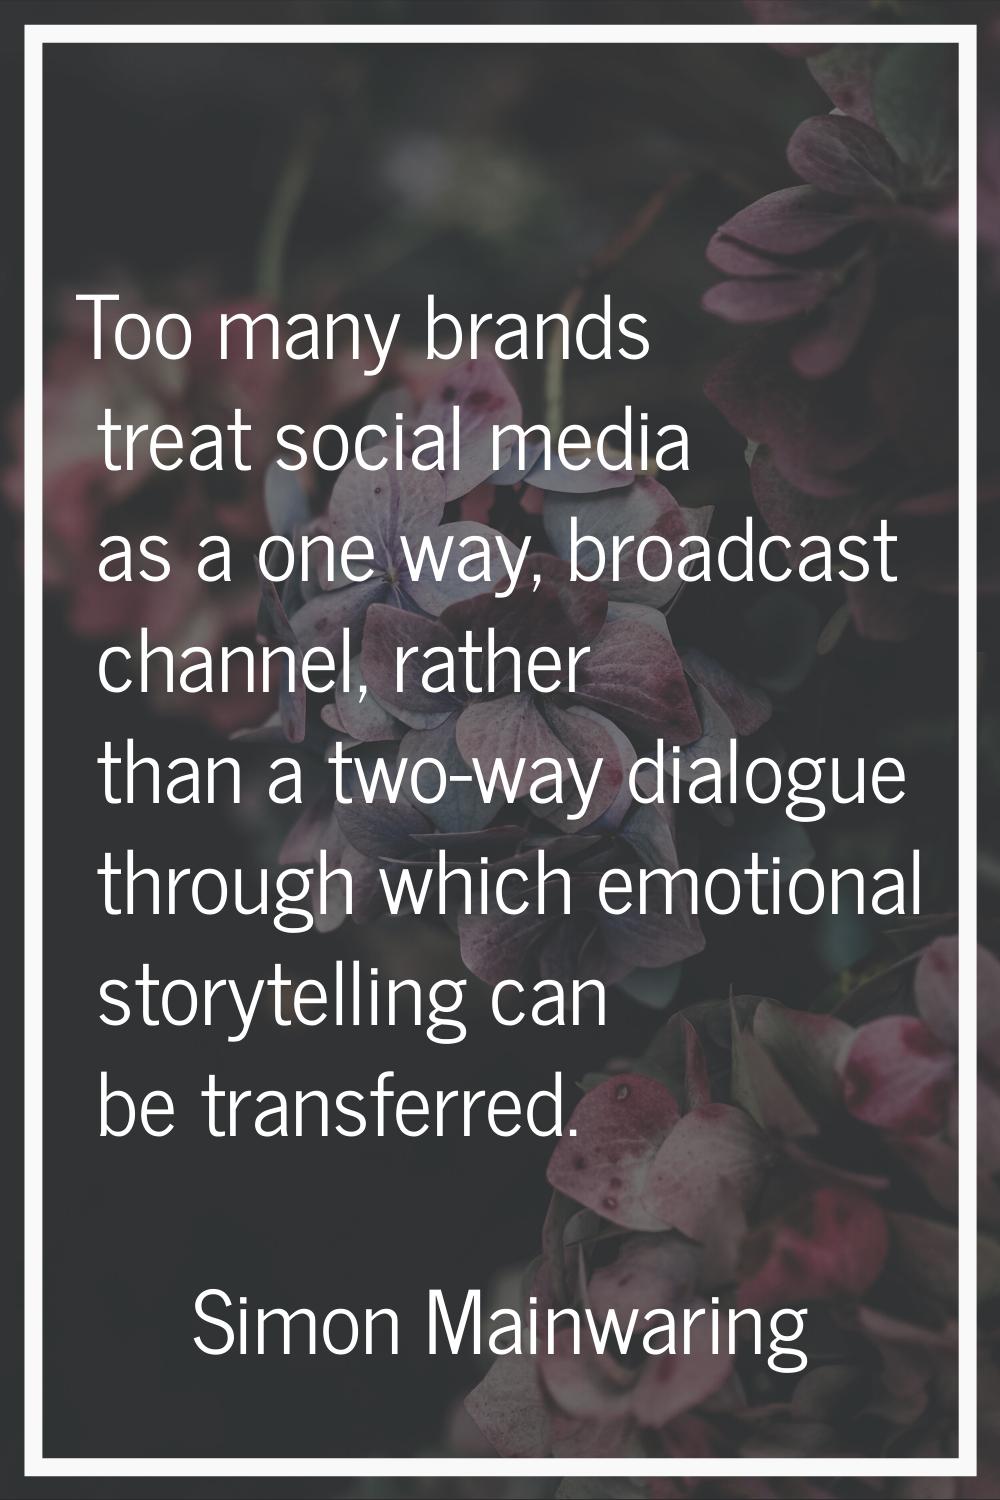 Too many brands treat social media as a one way, broadcast channel, rather than a two-way dialogue 